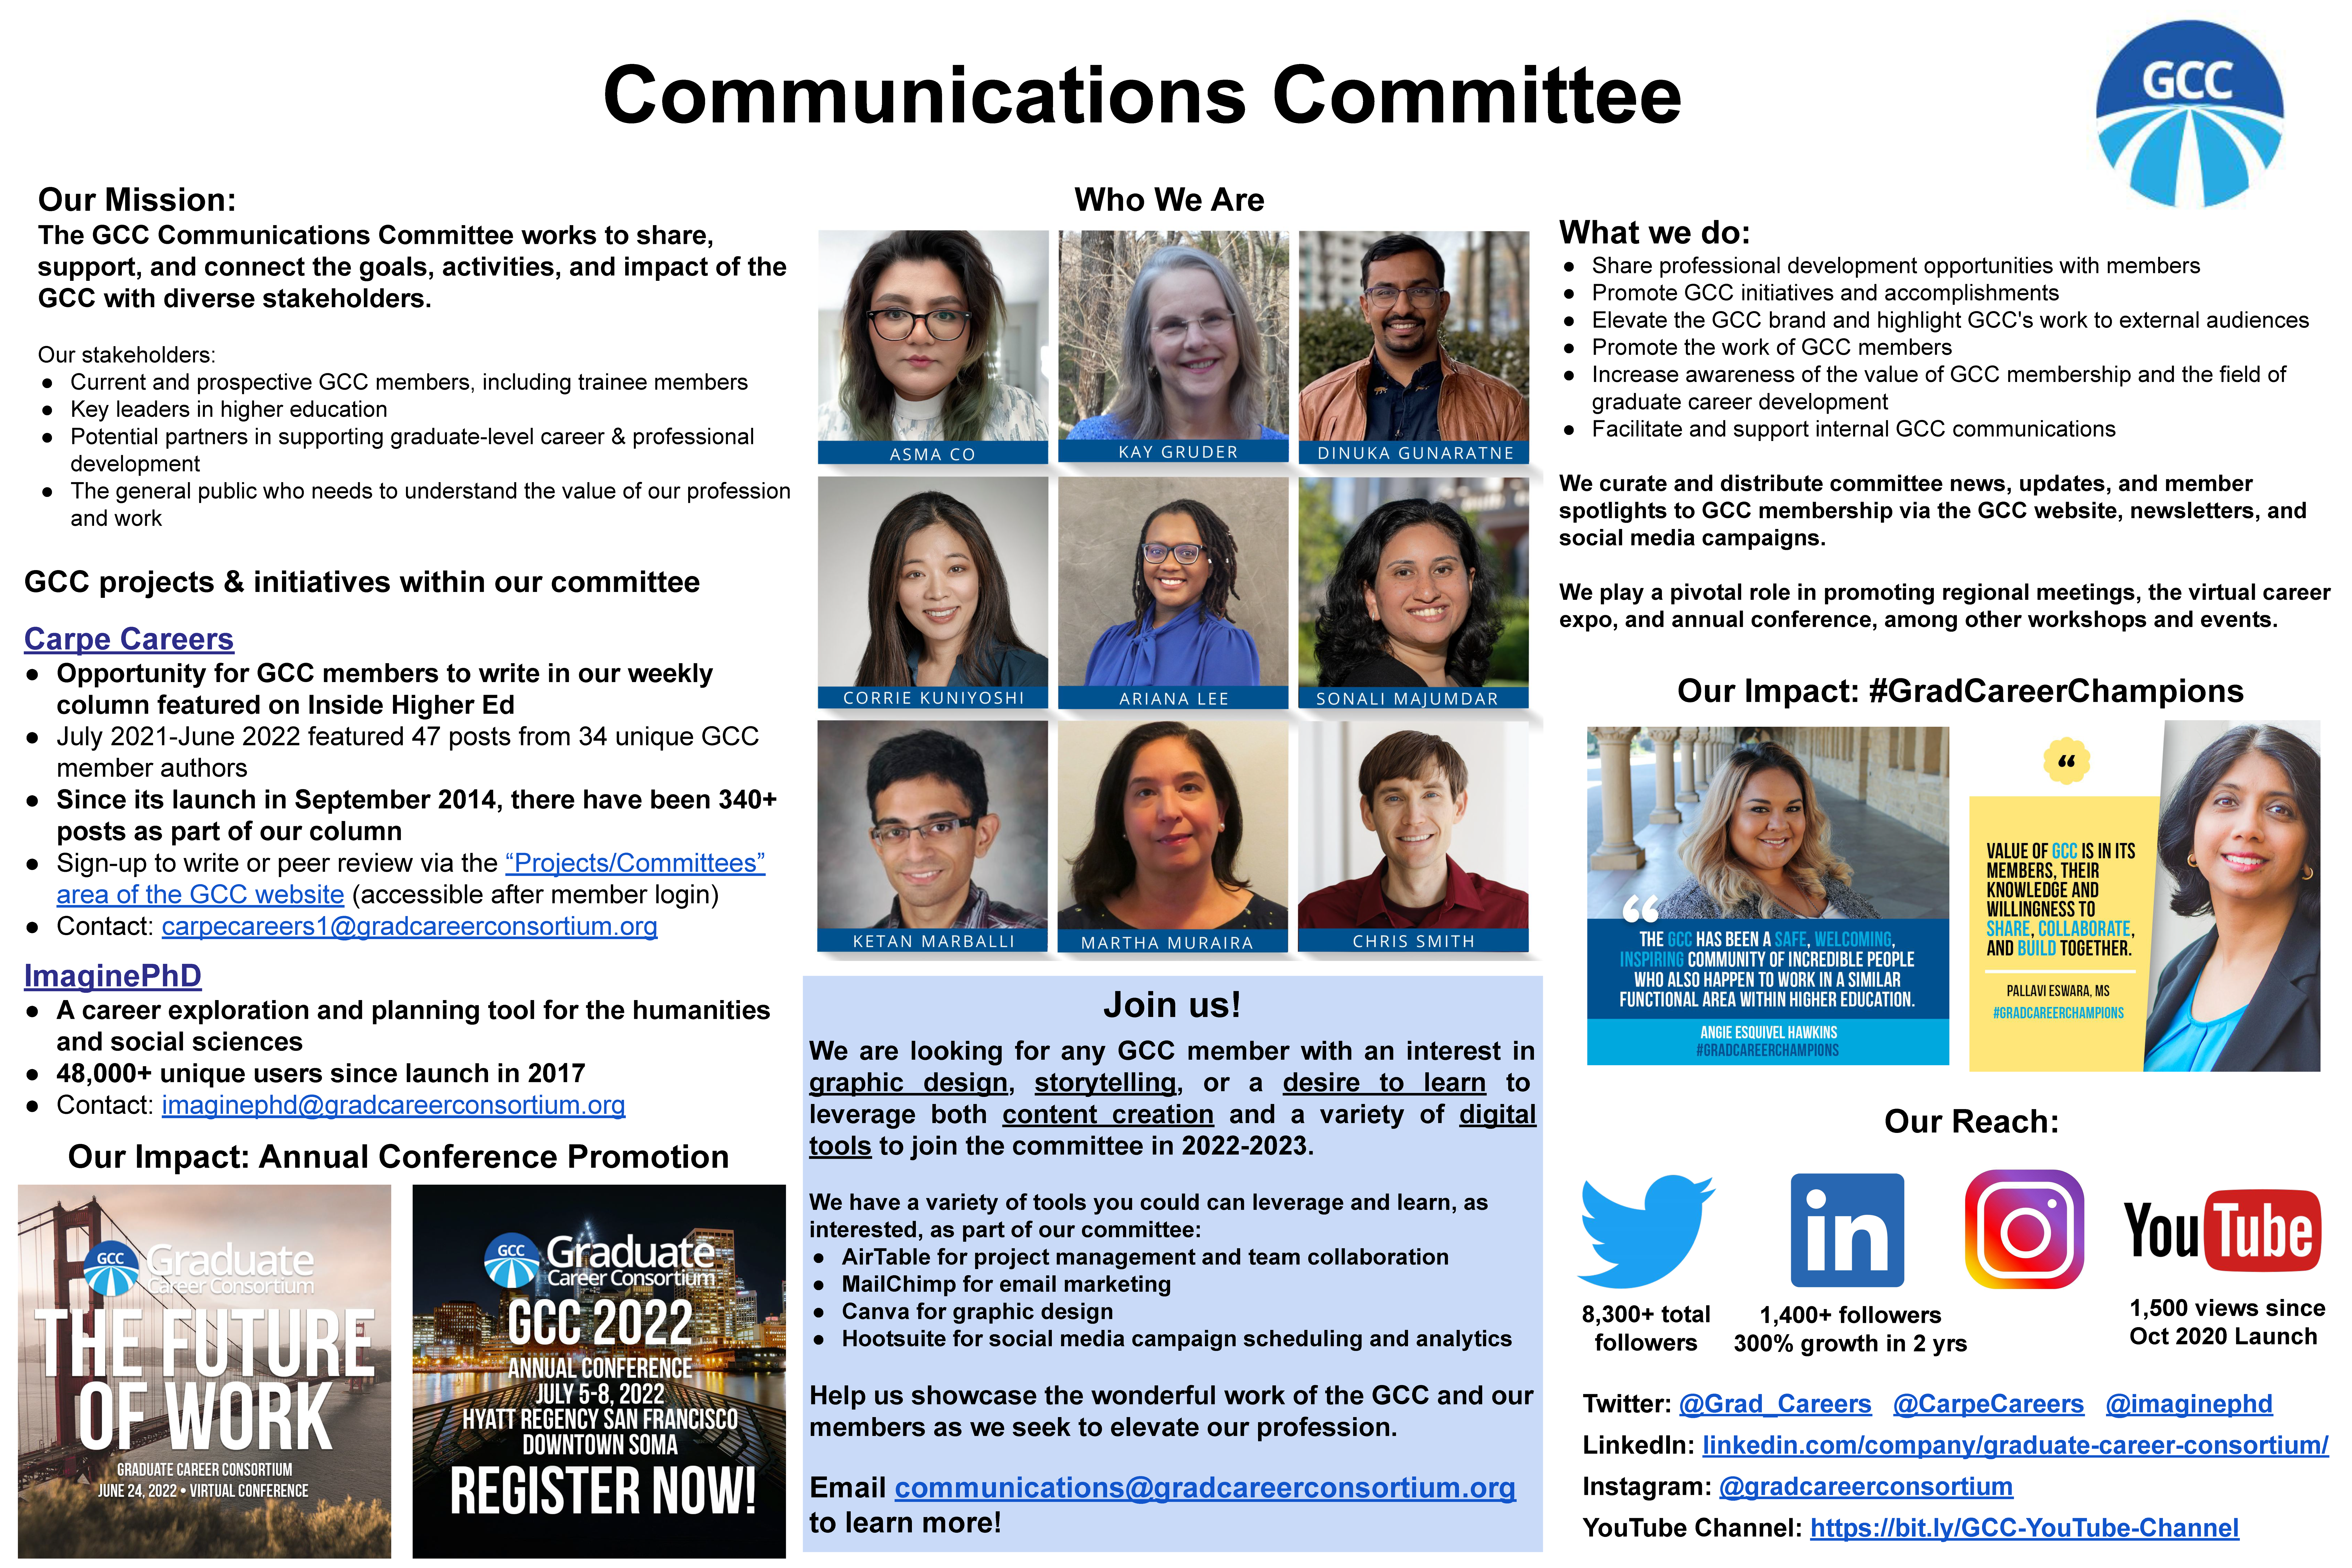 GCC Communications Committee Overview Poster